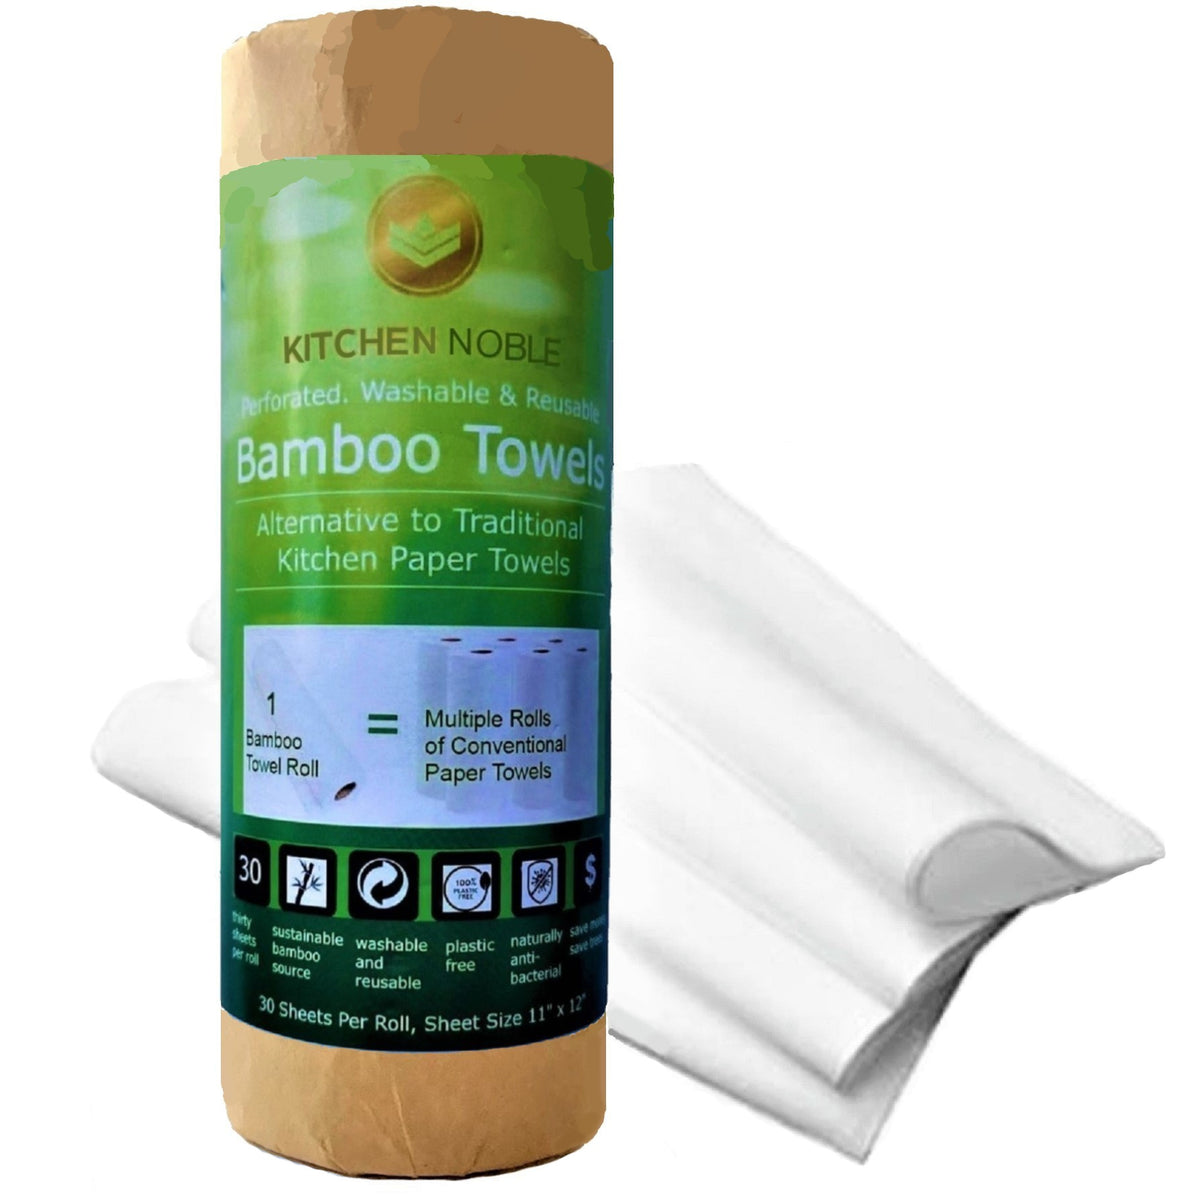 Vinsani® Reusable Bamboo Towels – Sheets of Super Strong Ultra Absorbent &  Eco-Friendly Towels - Zero Plastic Packaging